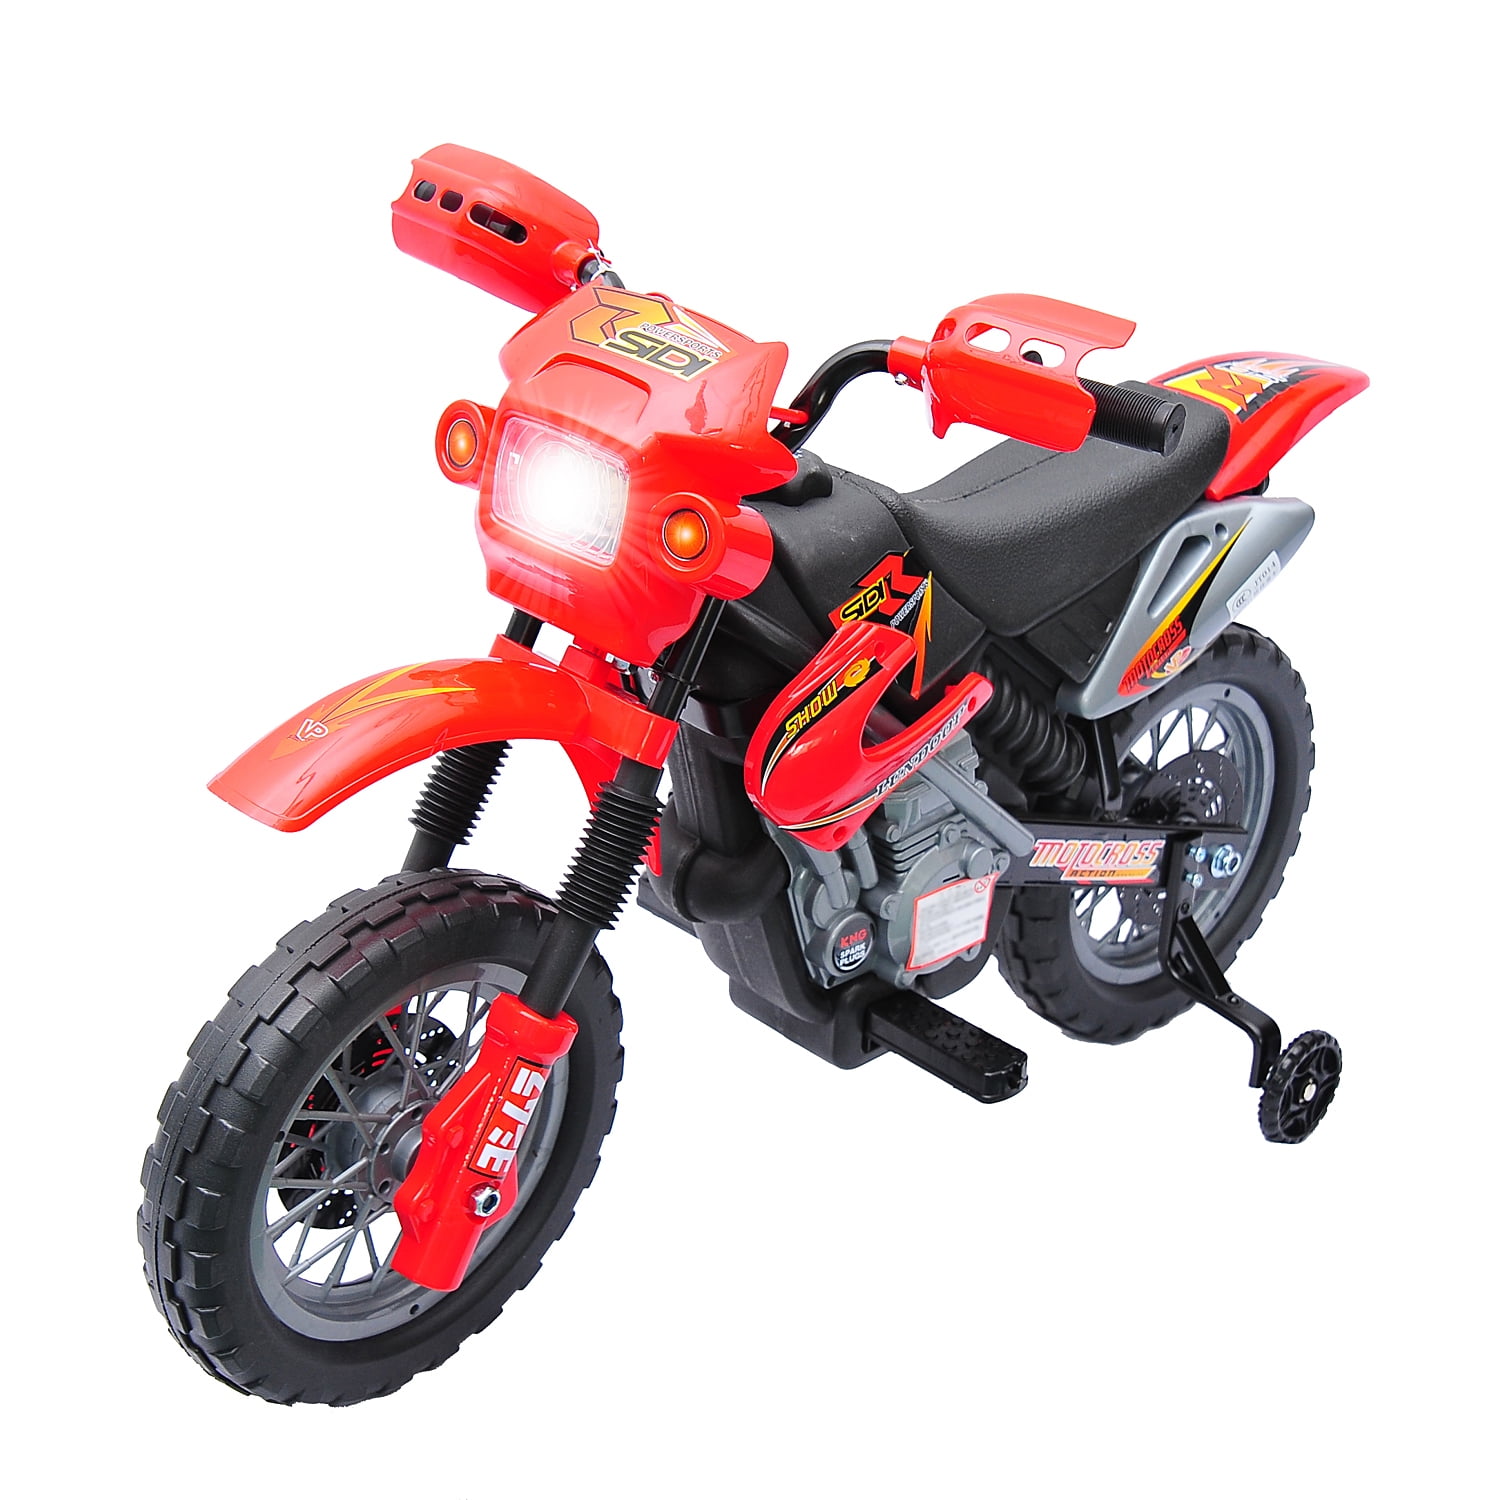 Motorcycle Ride On Car Toy Battery Powered 6V Electric Kids Motor Vehicle Red 